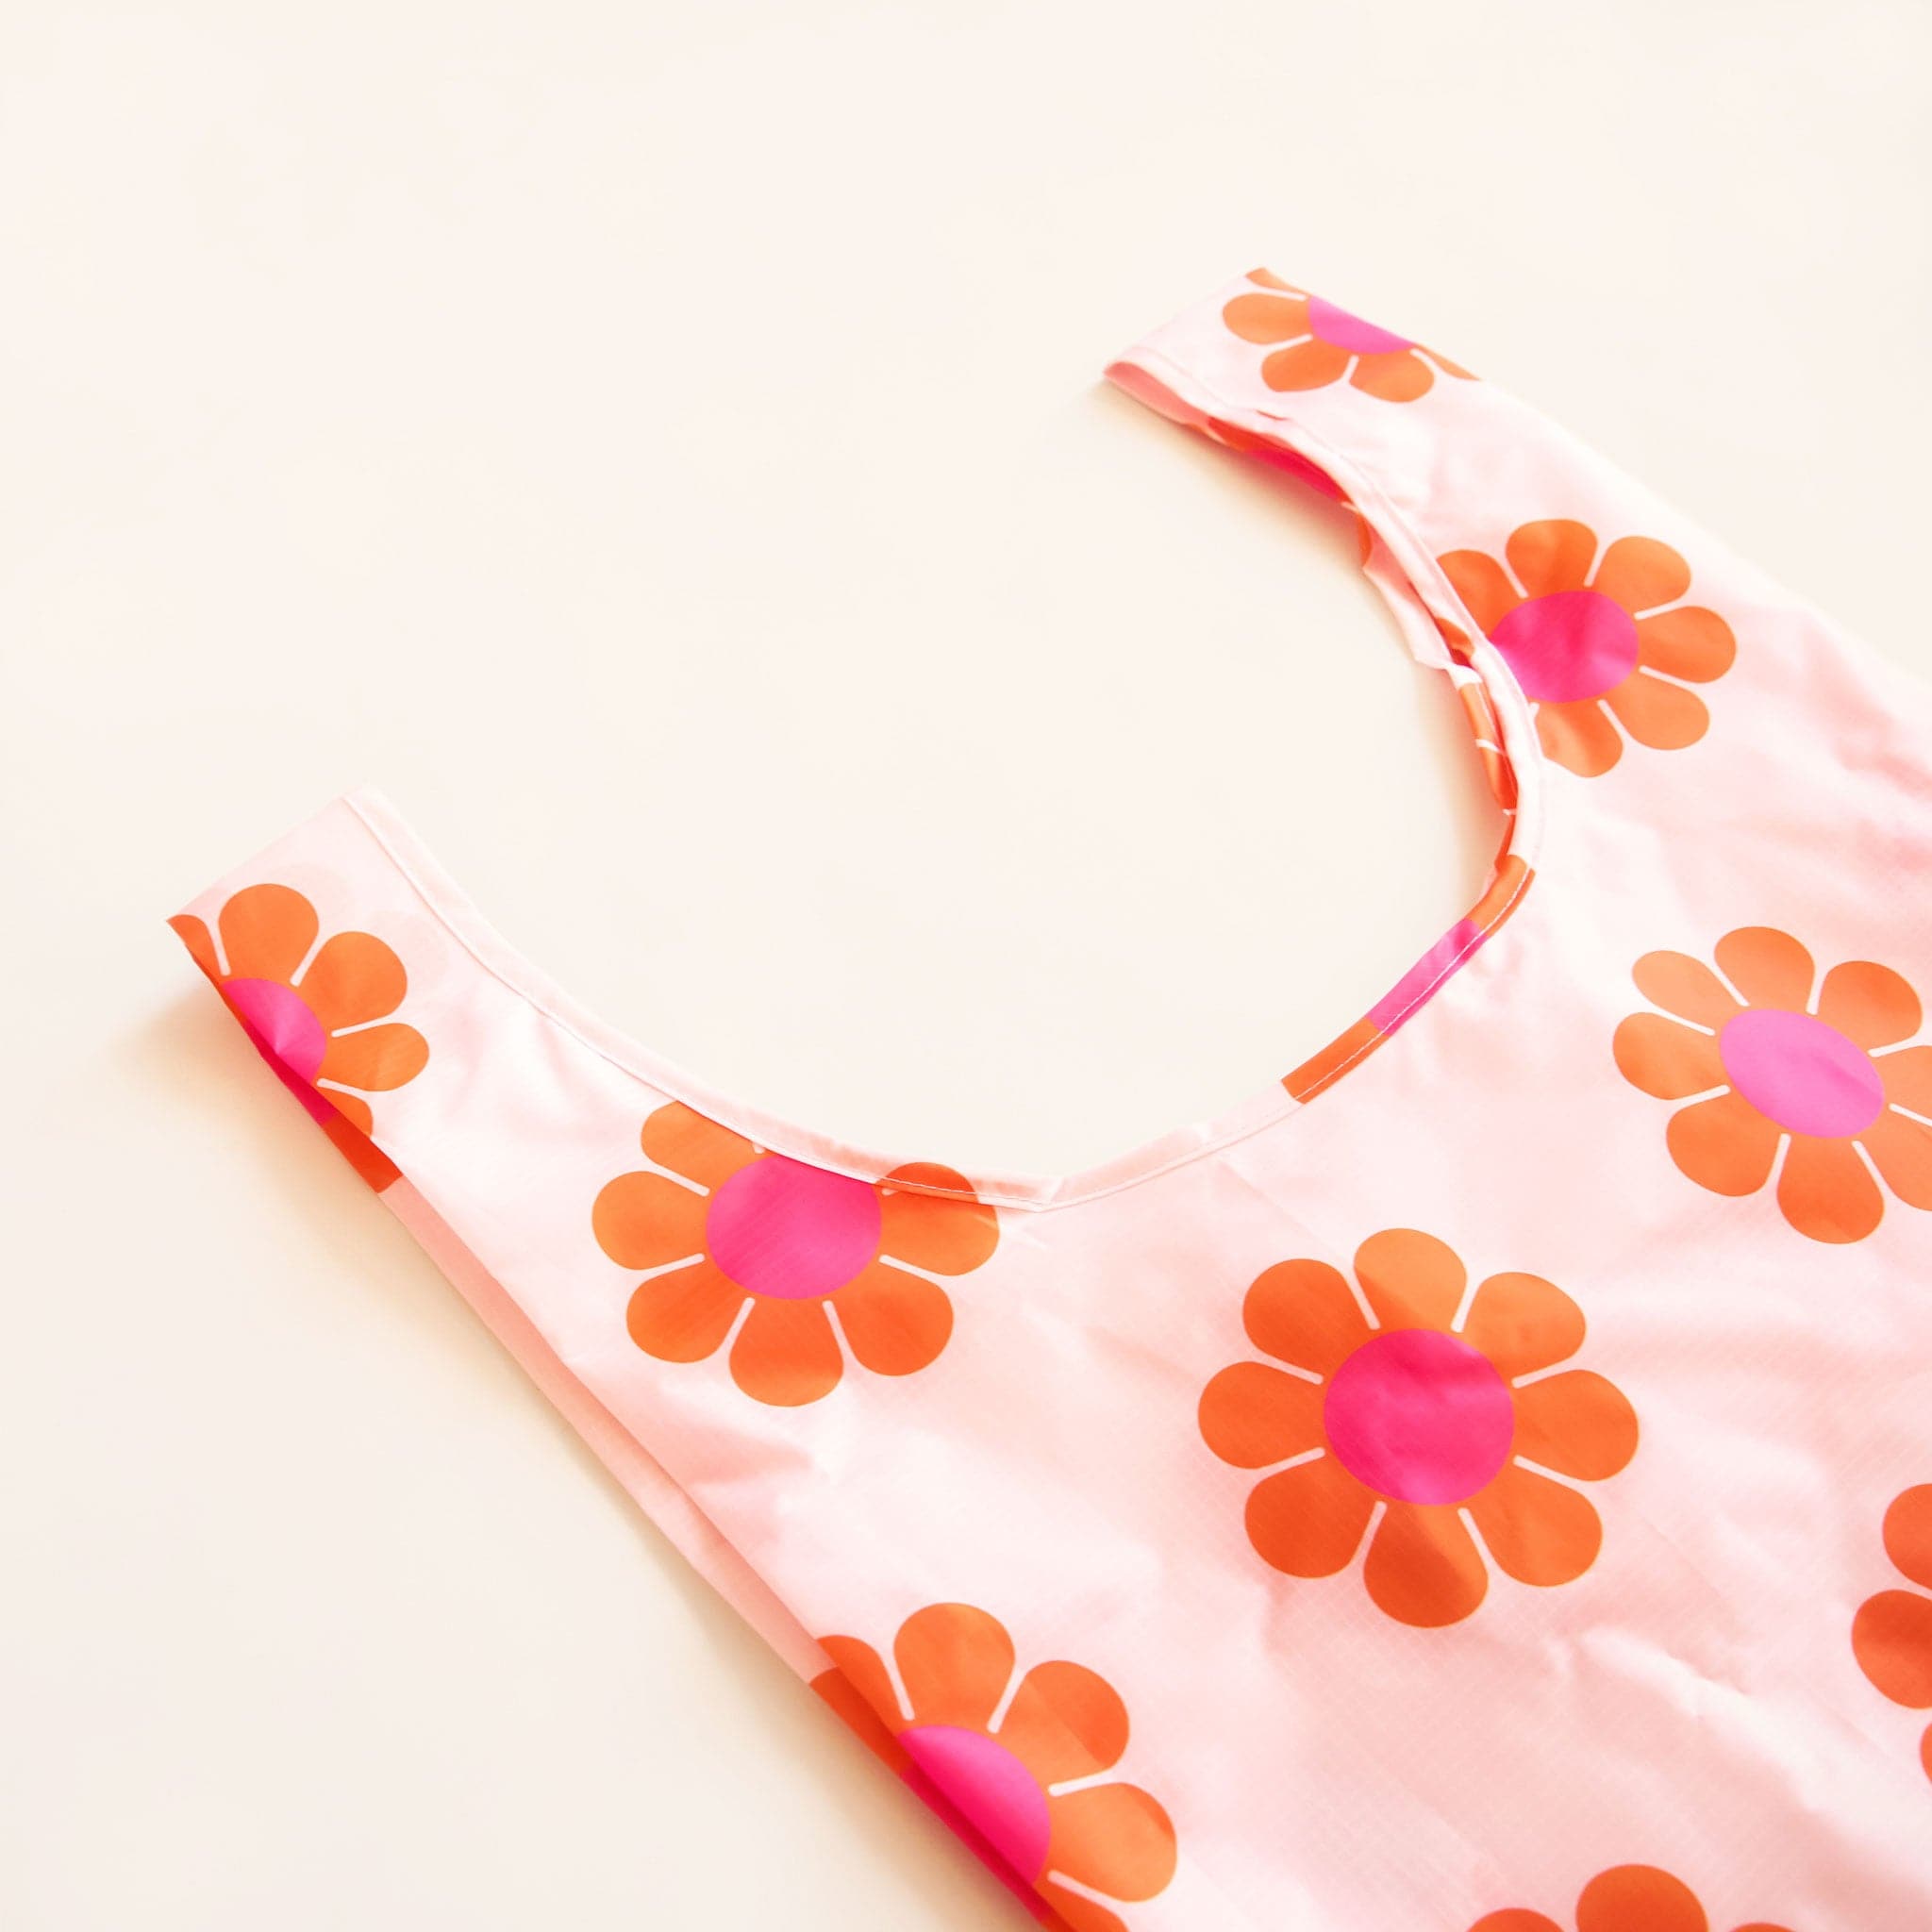 Zoomed in view of peach reusable bag covered in a print of simple flowers with red-orange petals and magenta centers. The bag is positioned flat on a table and has a &#39;U&#39; shape between two handles.